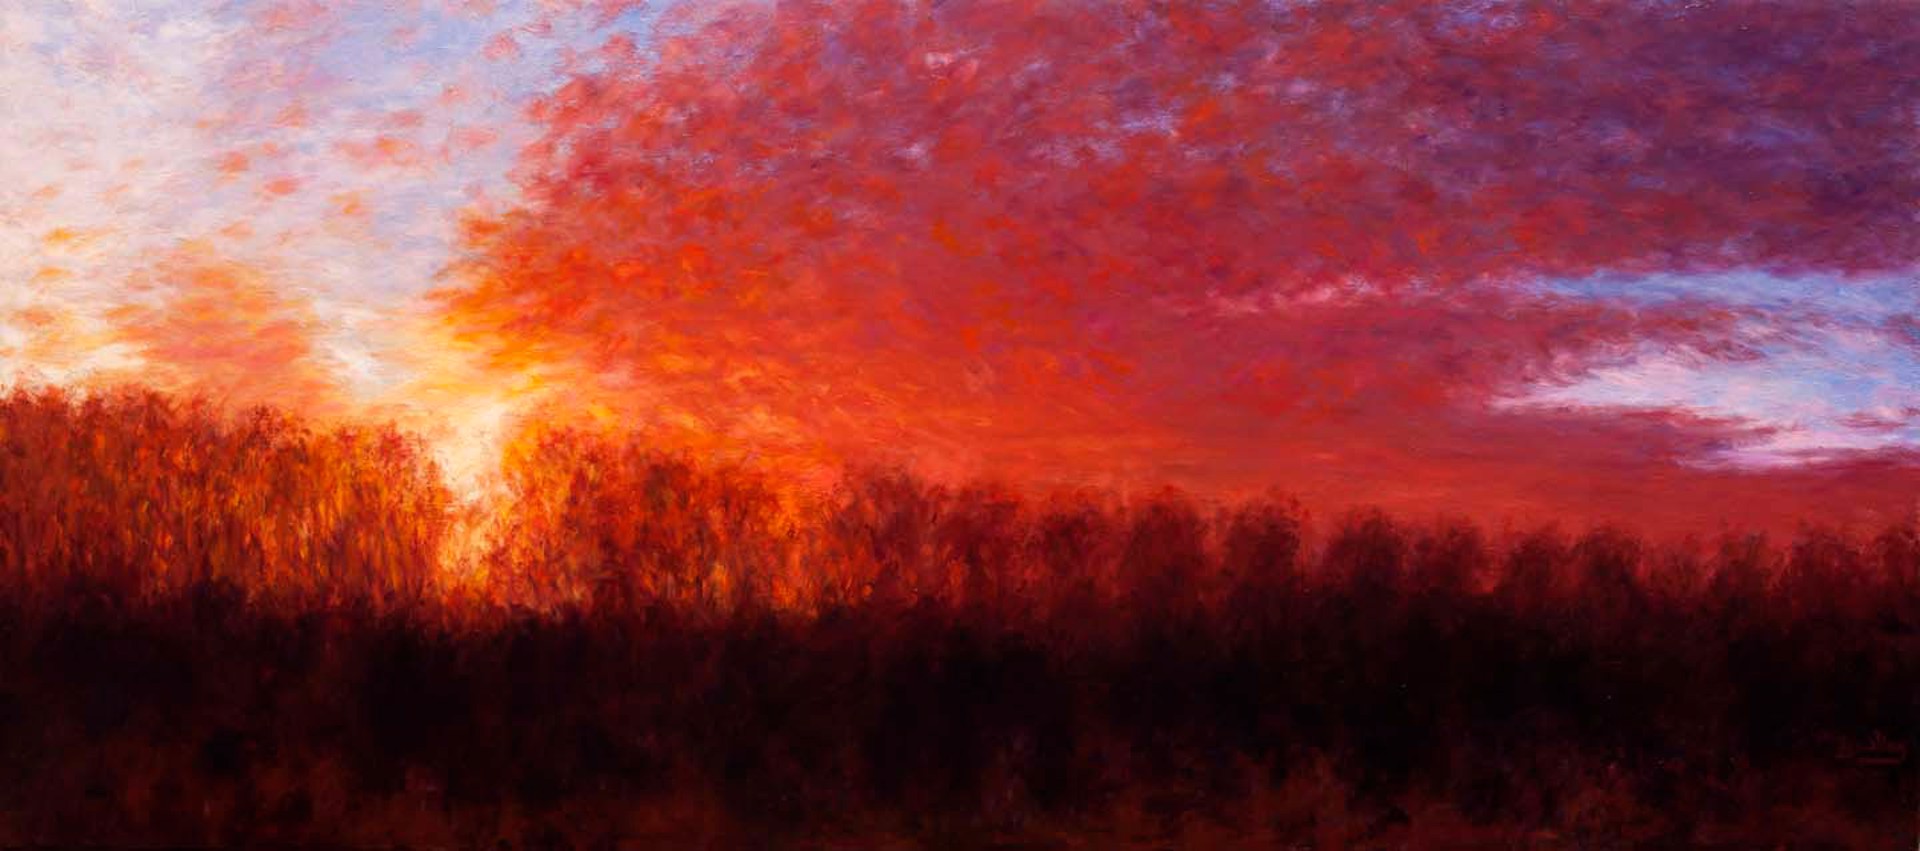 Infusion of Sunset by Gary Bowling